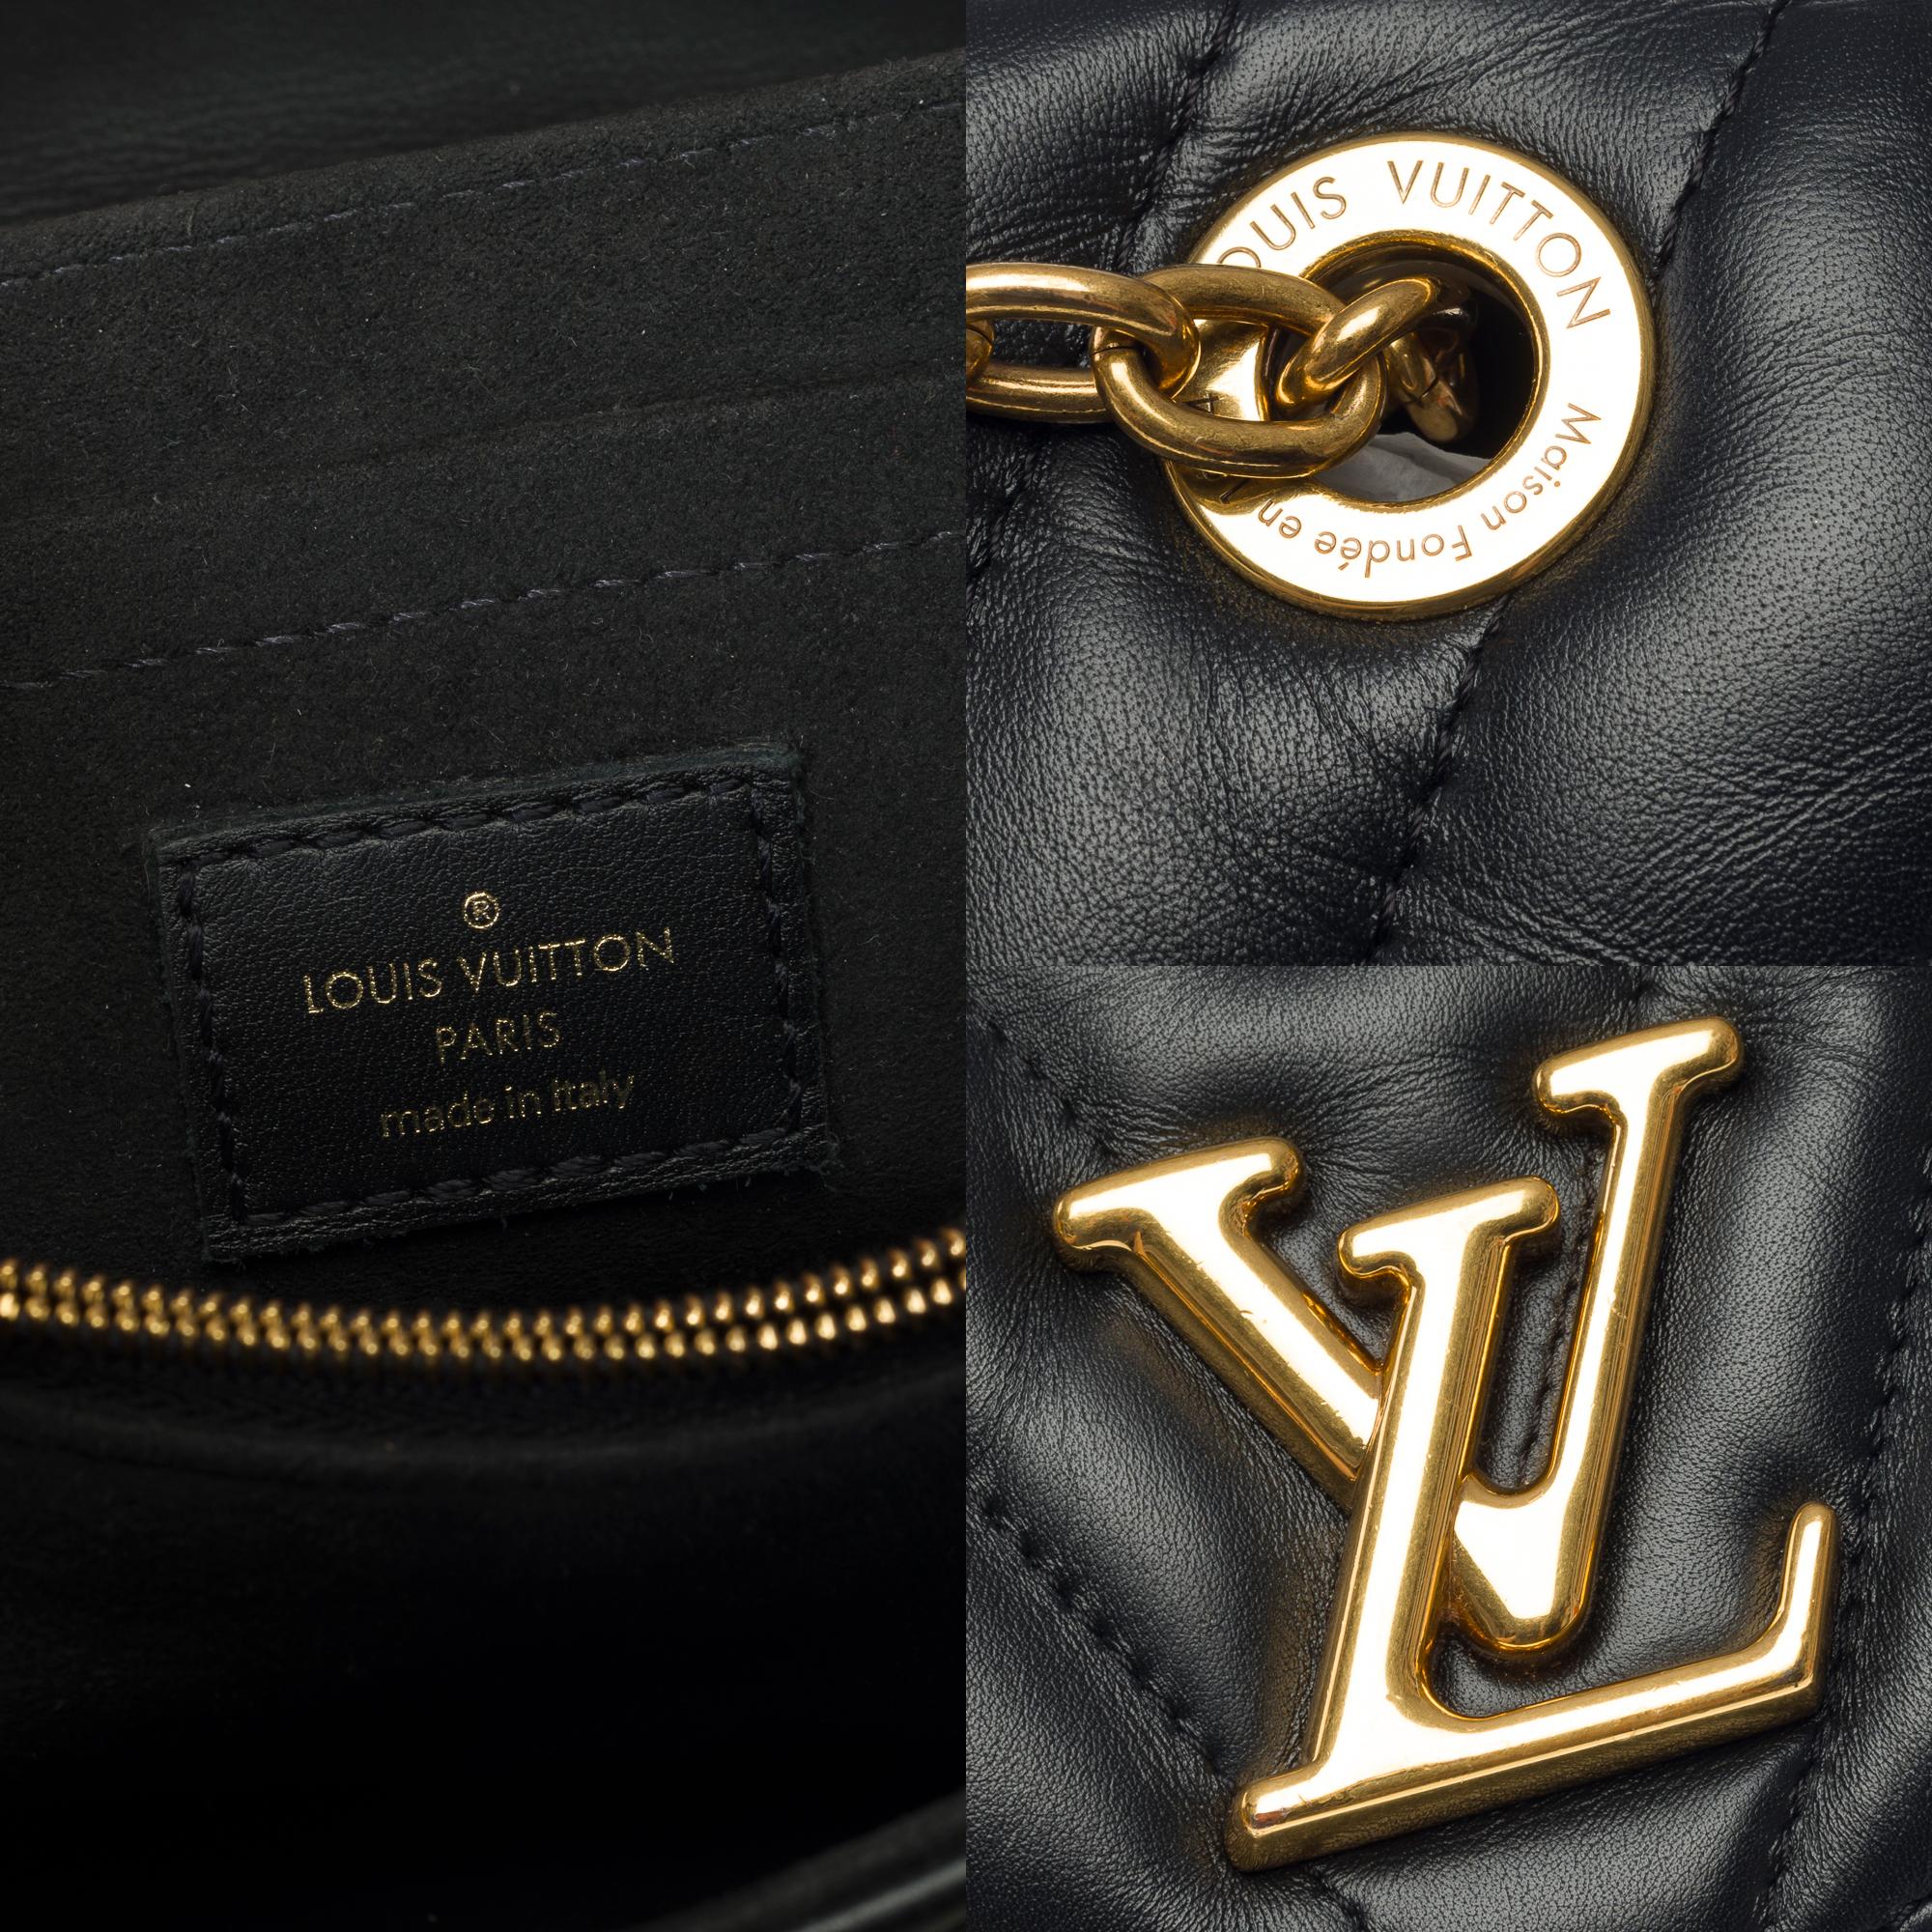 Louis Vuitton Wave shoulder bag in Black quilted calf leather, GHW 2